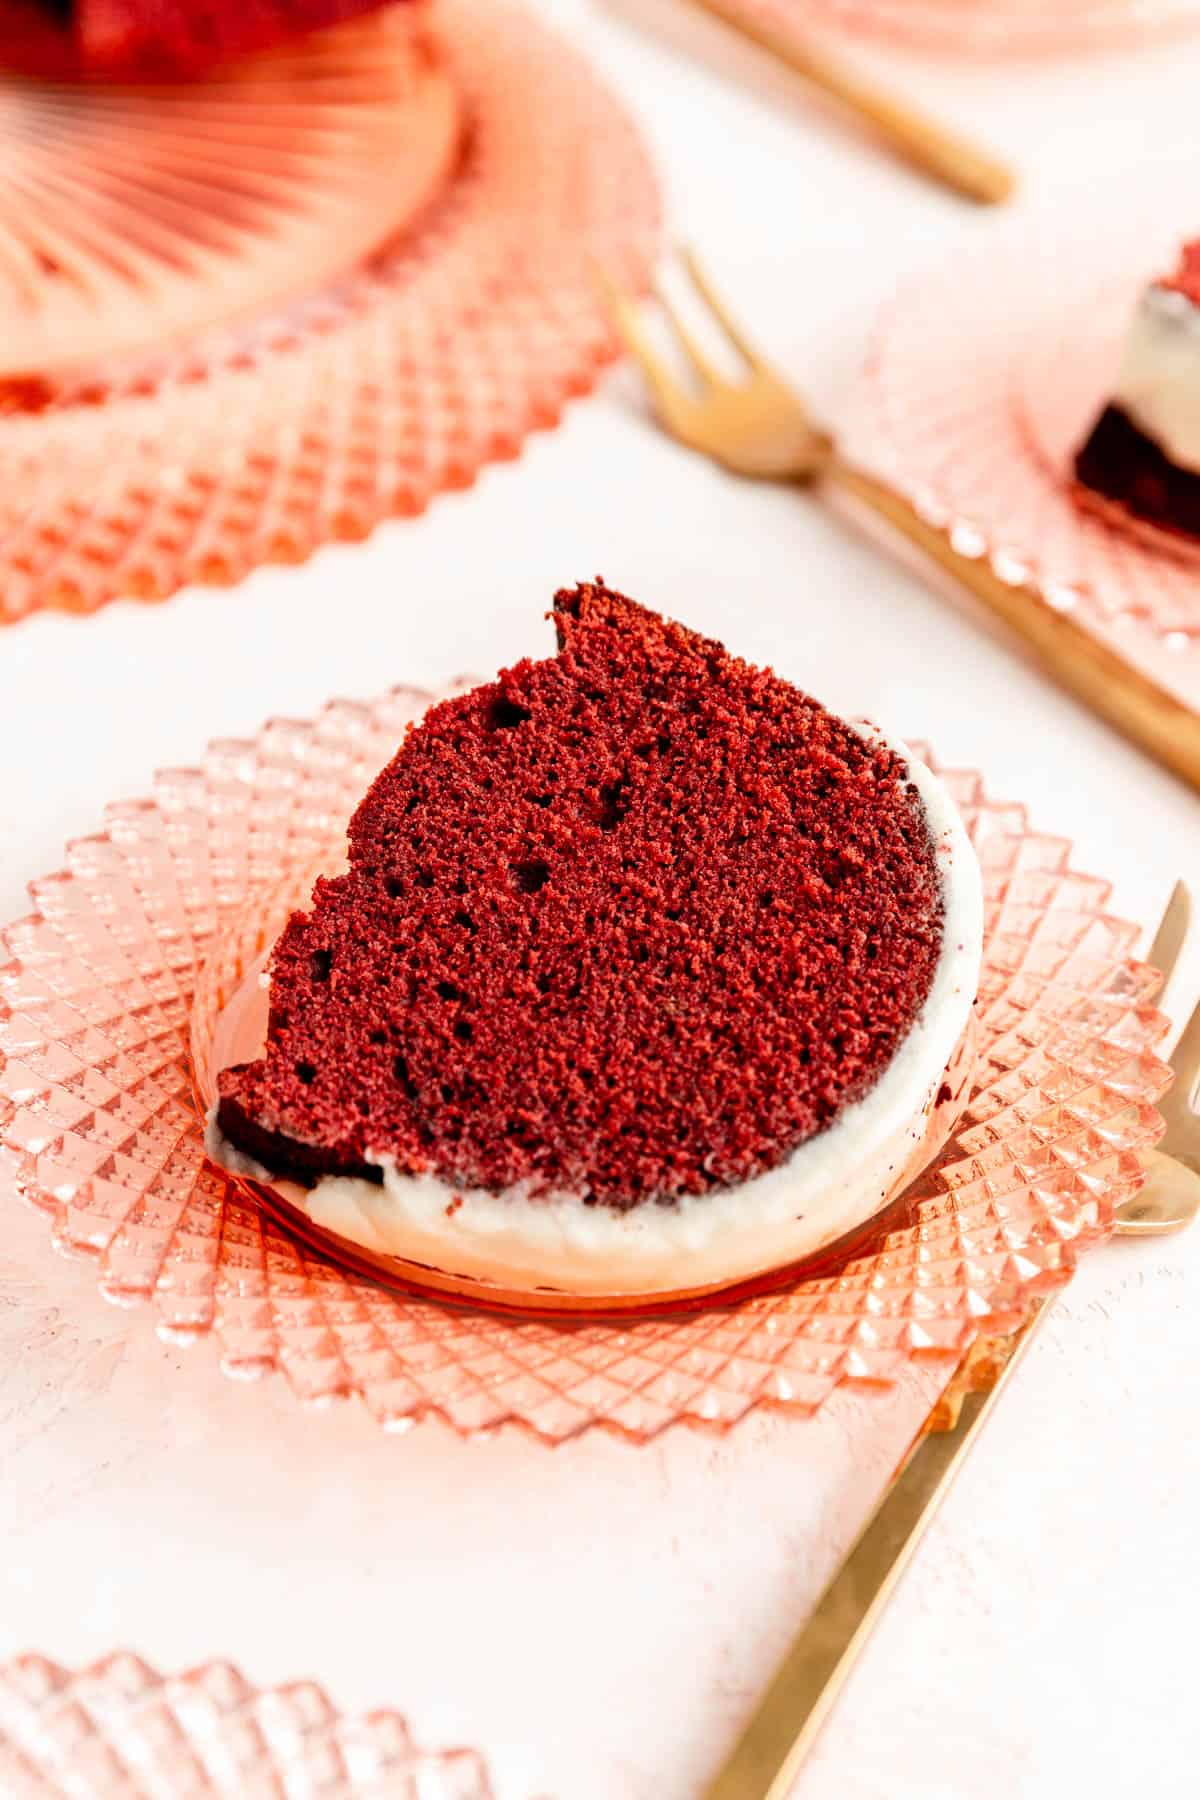 45° view of slice of red velvet Bundt cake with white glaze on pink plate.